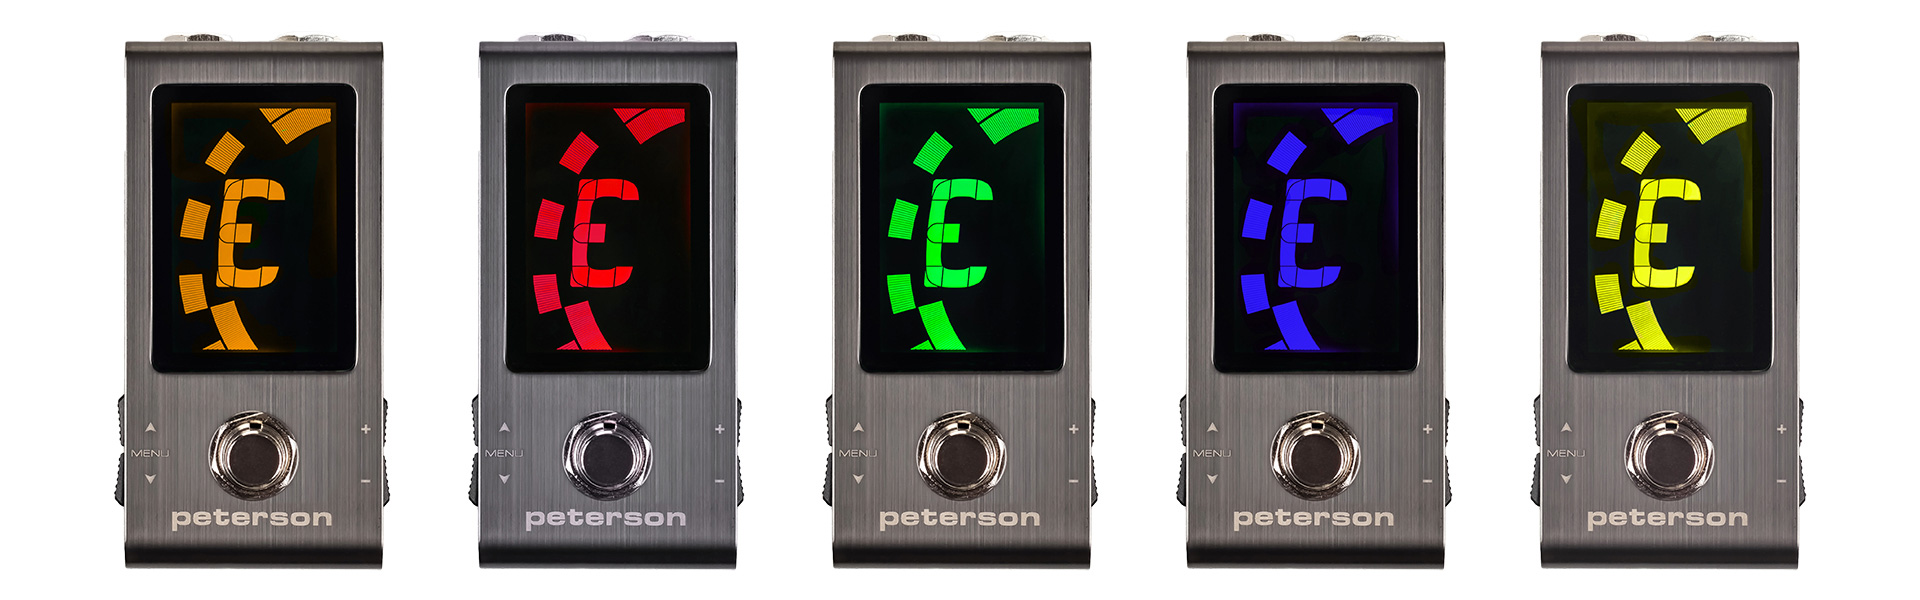 We All See Color Differently | Peterson Strobe Tuners